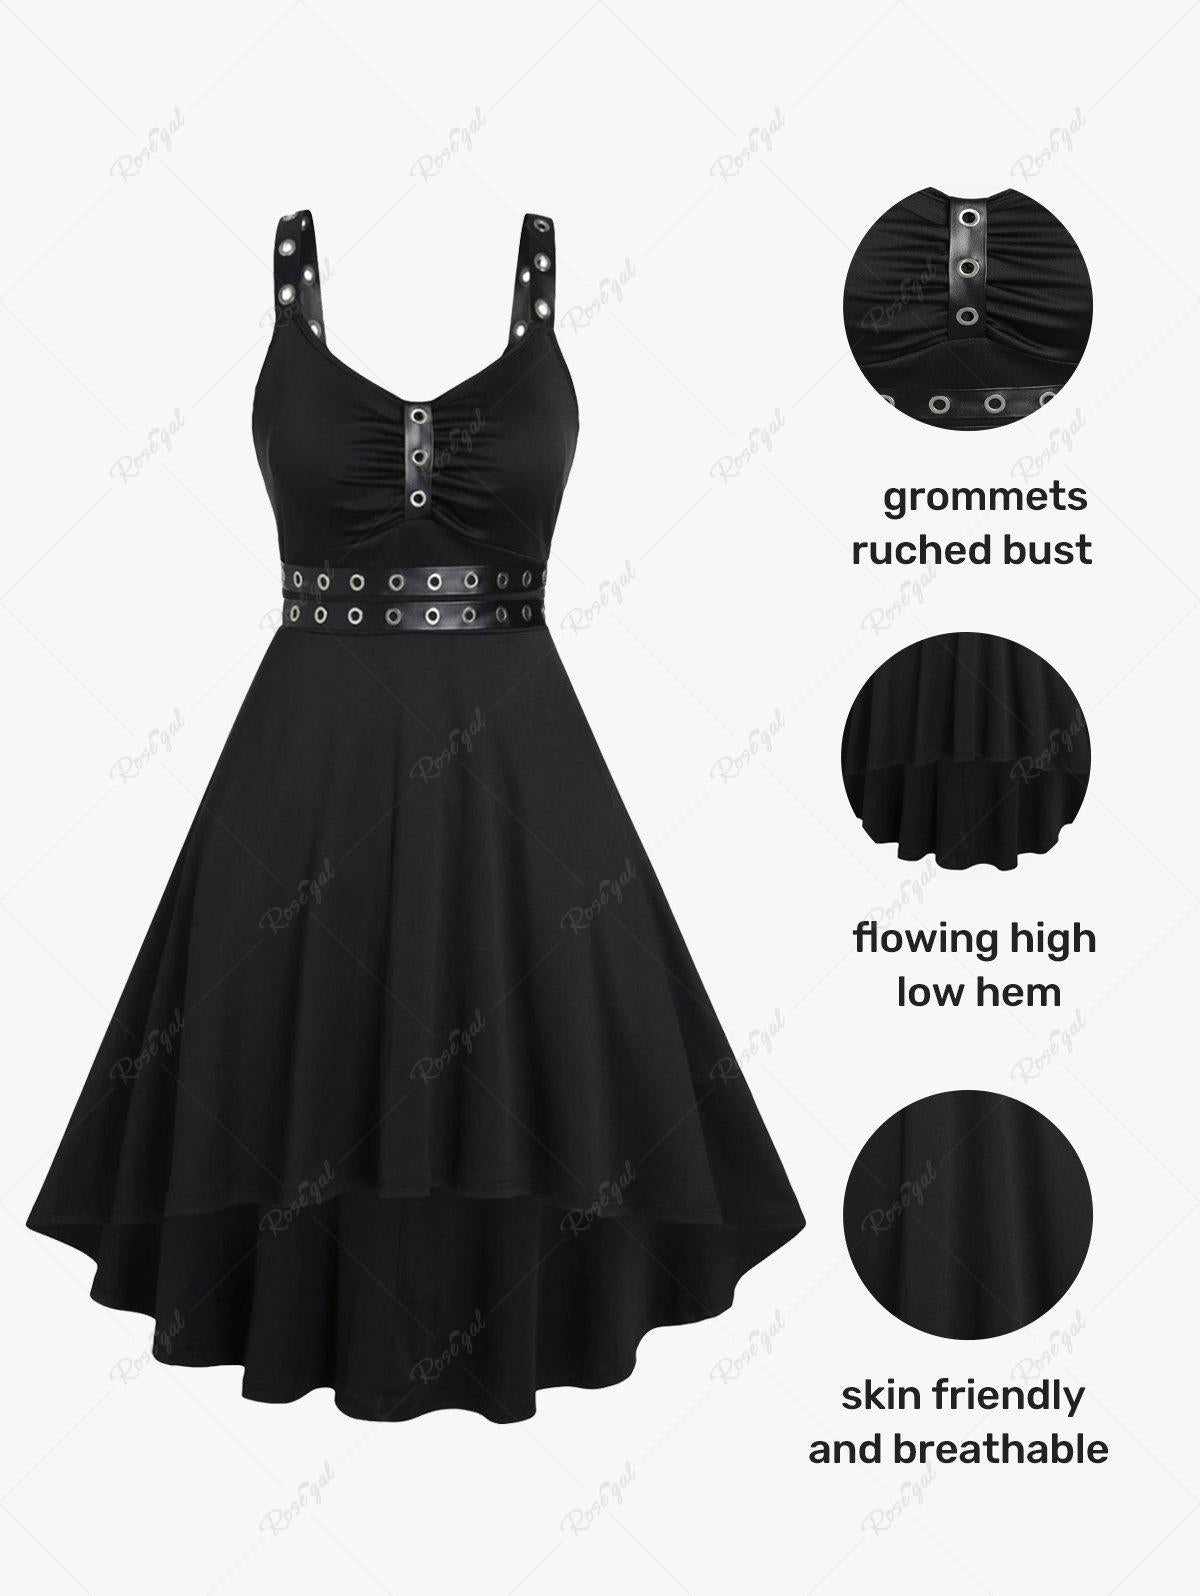 💗Cherry Loves💗 Gothic Grommets High Low Vintage 1950s Pin Up Dress(US Domestic Shipping)